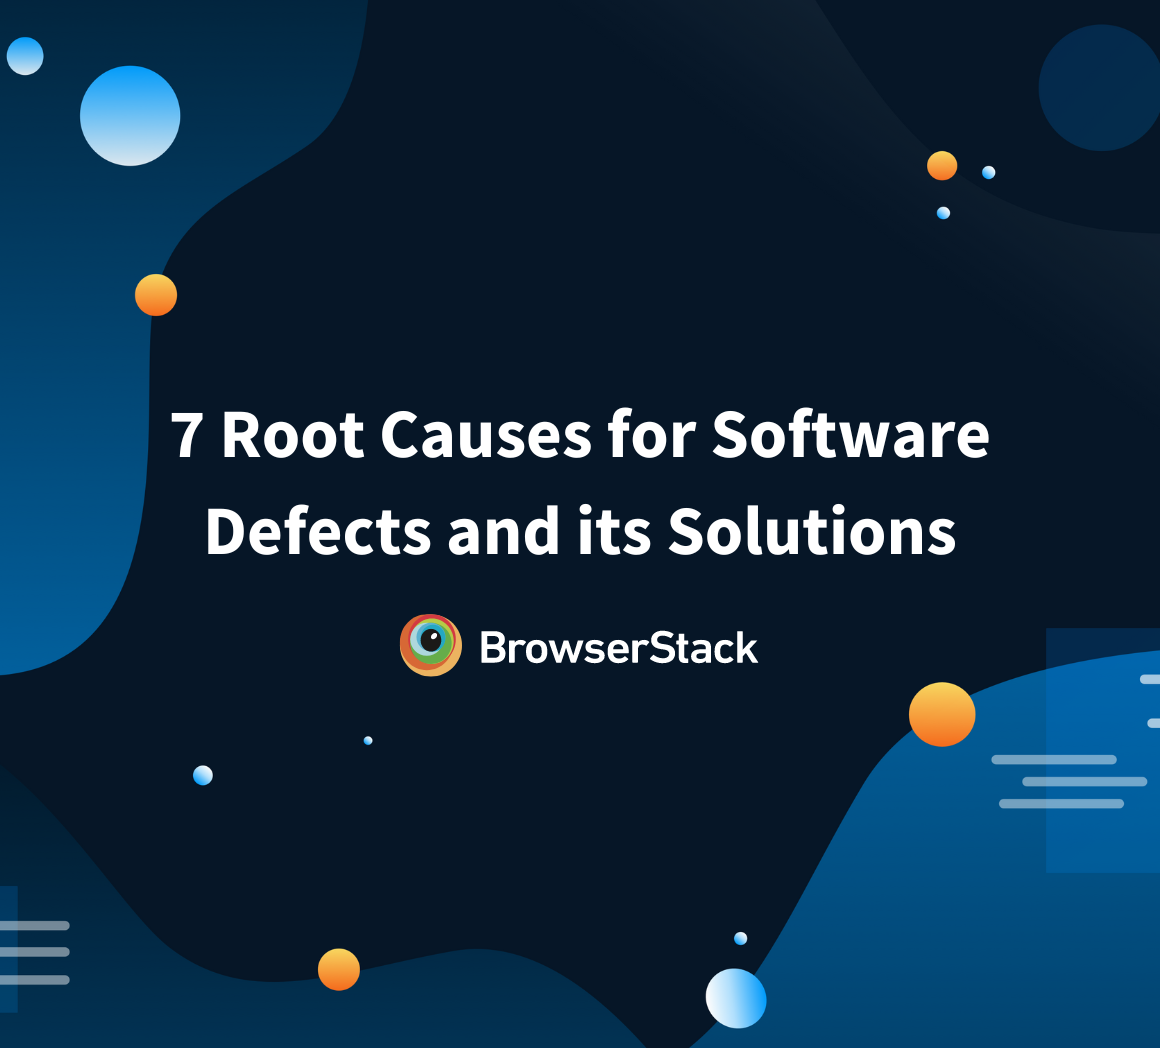 7 Root Causes for Software Defects and its Solutions | BrowserStack